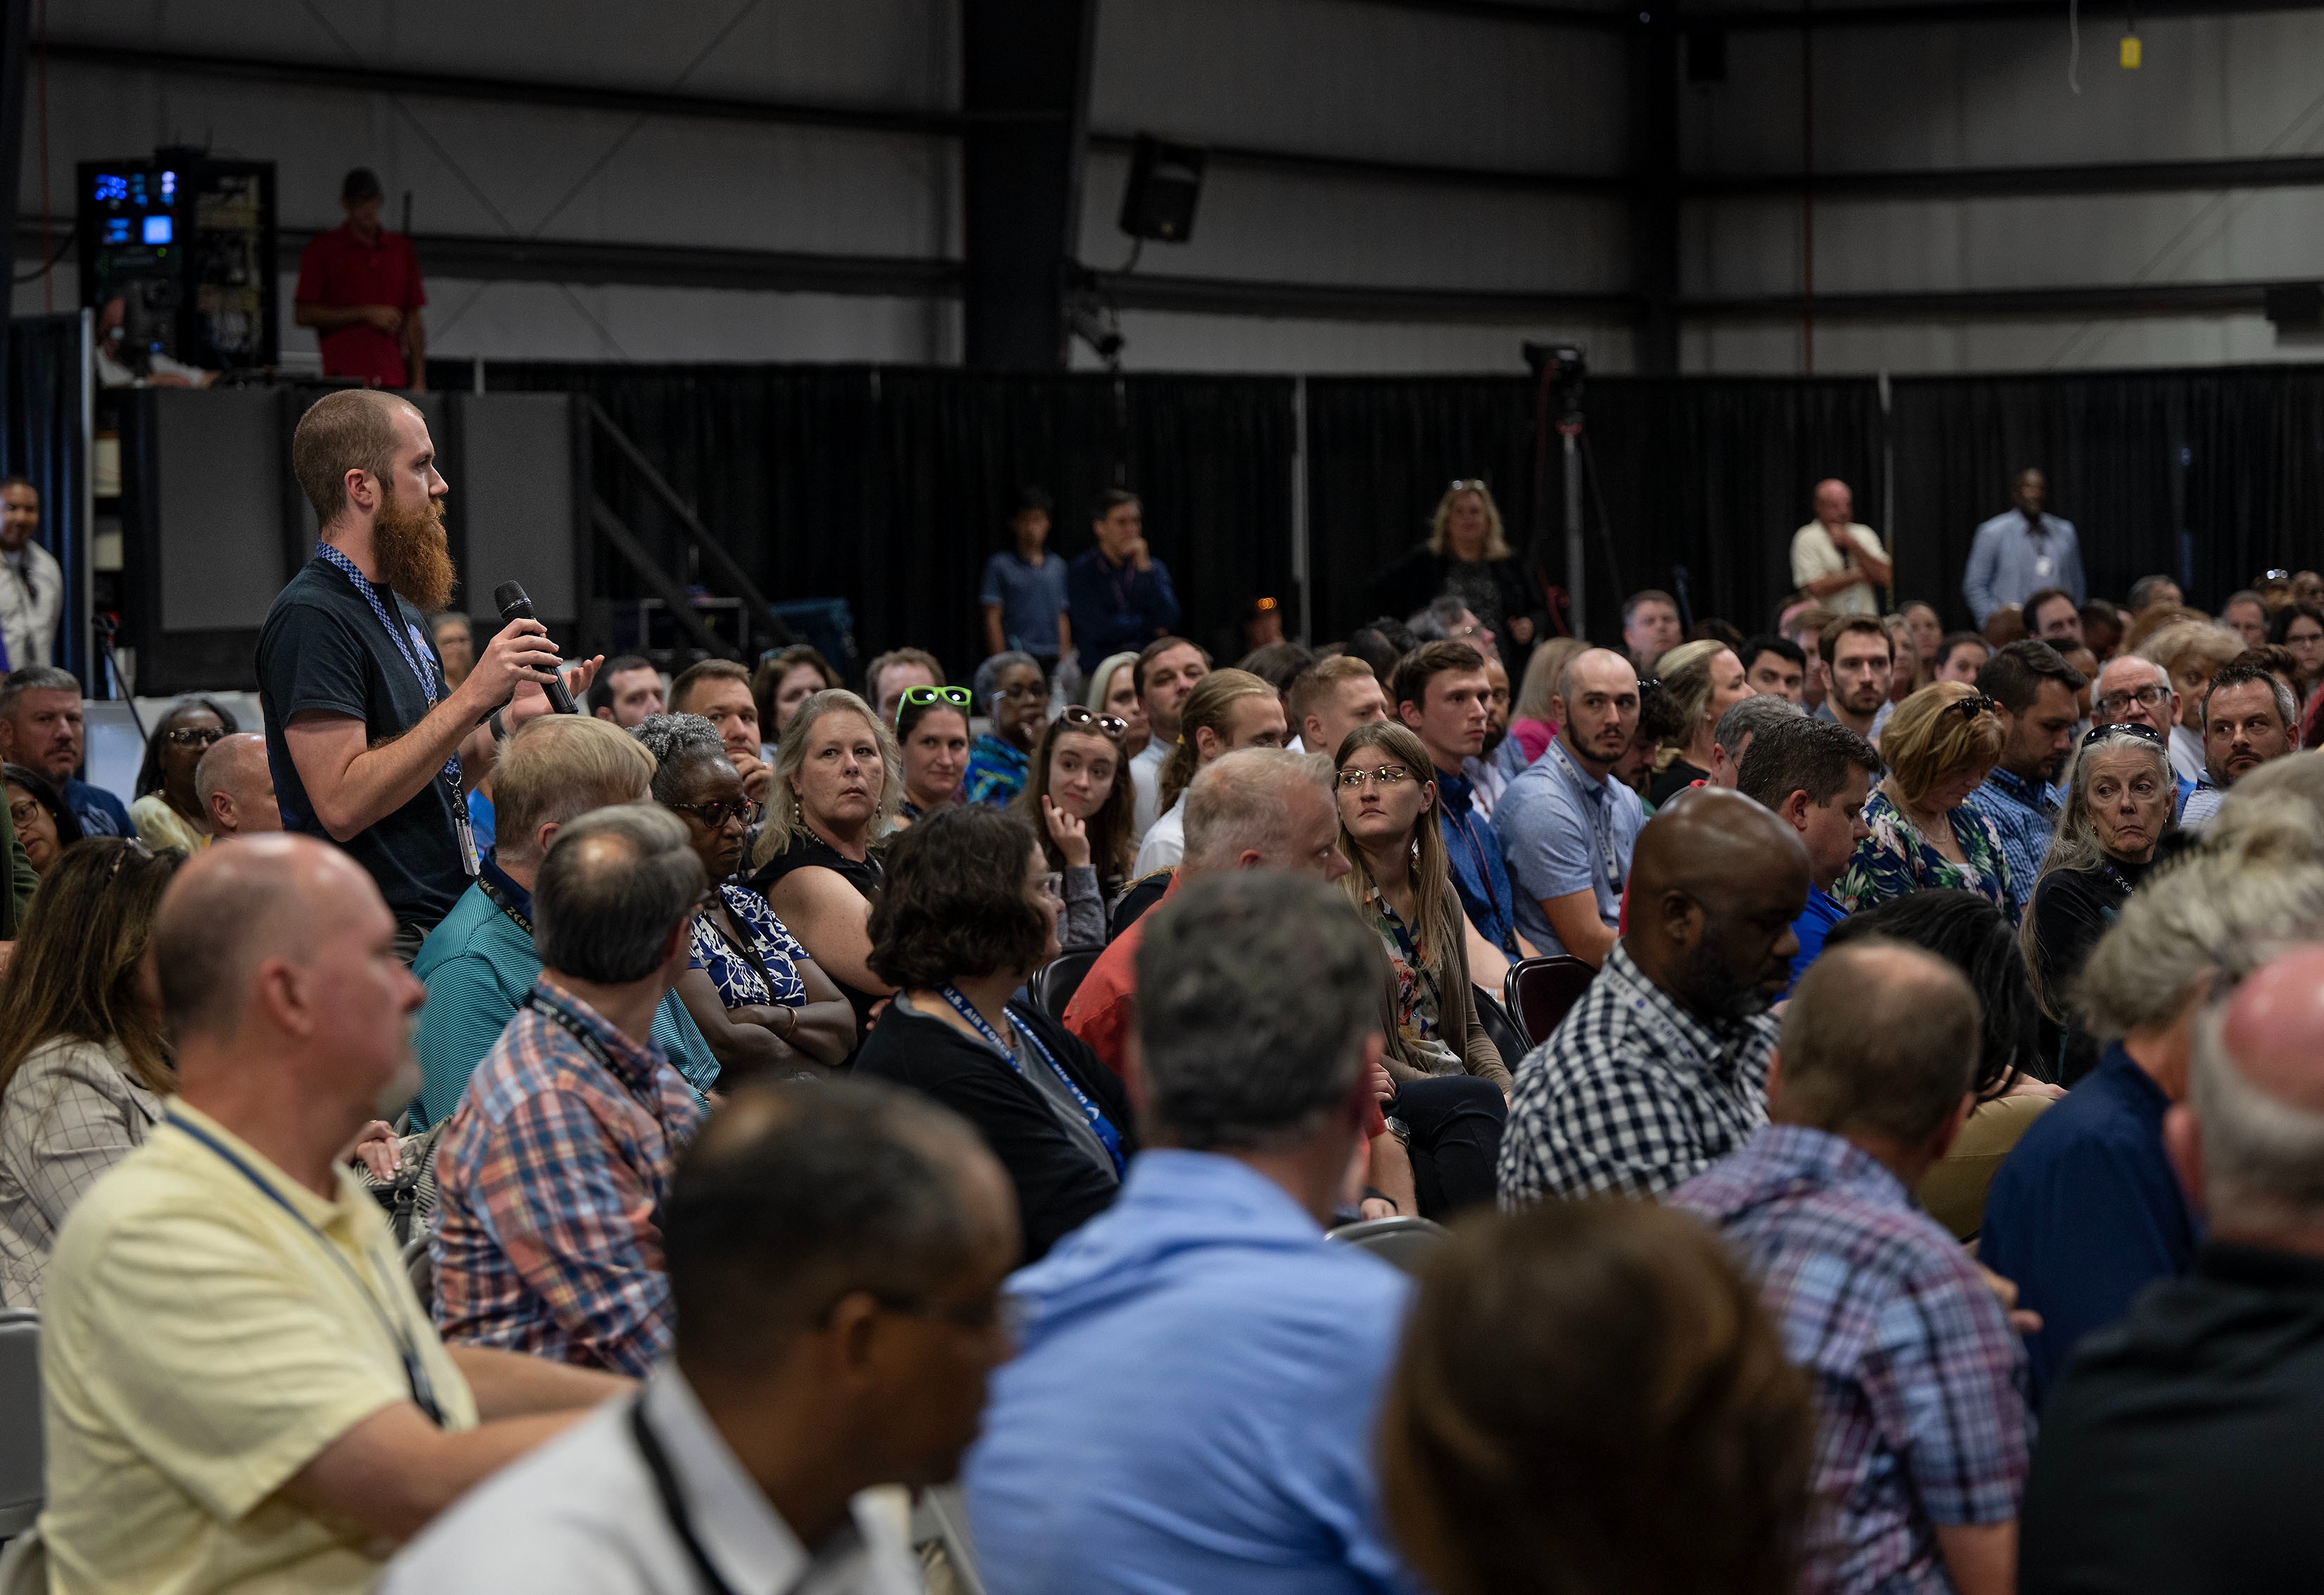 A Marshall team member poses a question to agency leaders during the Q&A portion of the Town Hall.